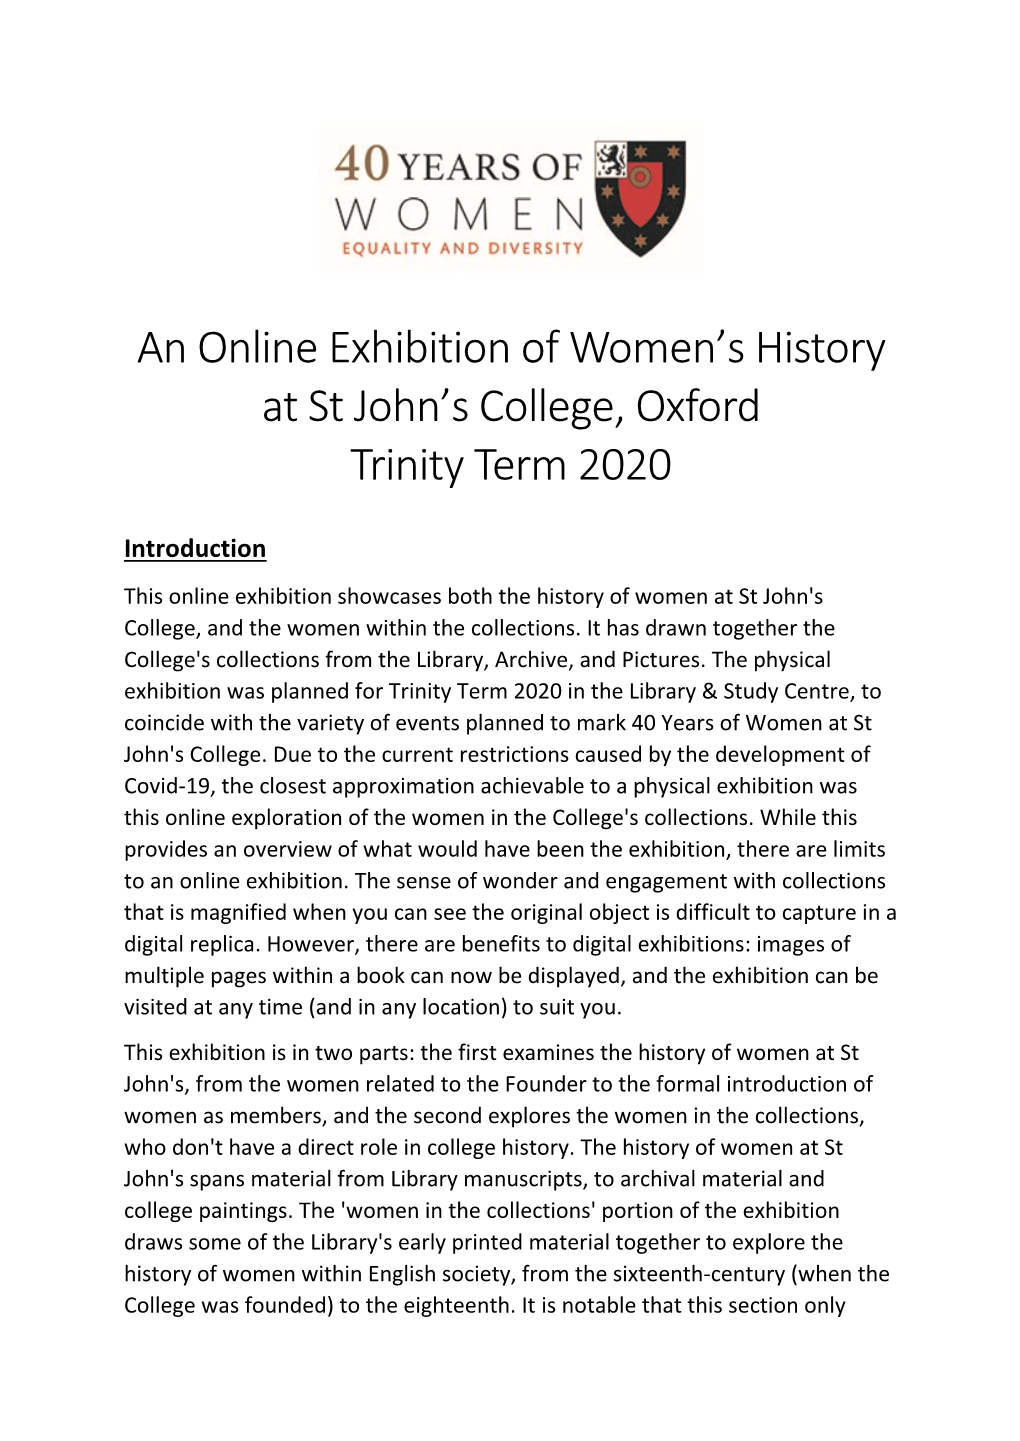 An Online Exhibition of Women's History at St John's College, Oxford